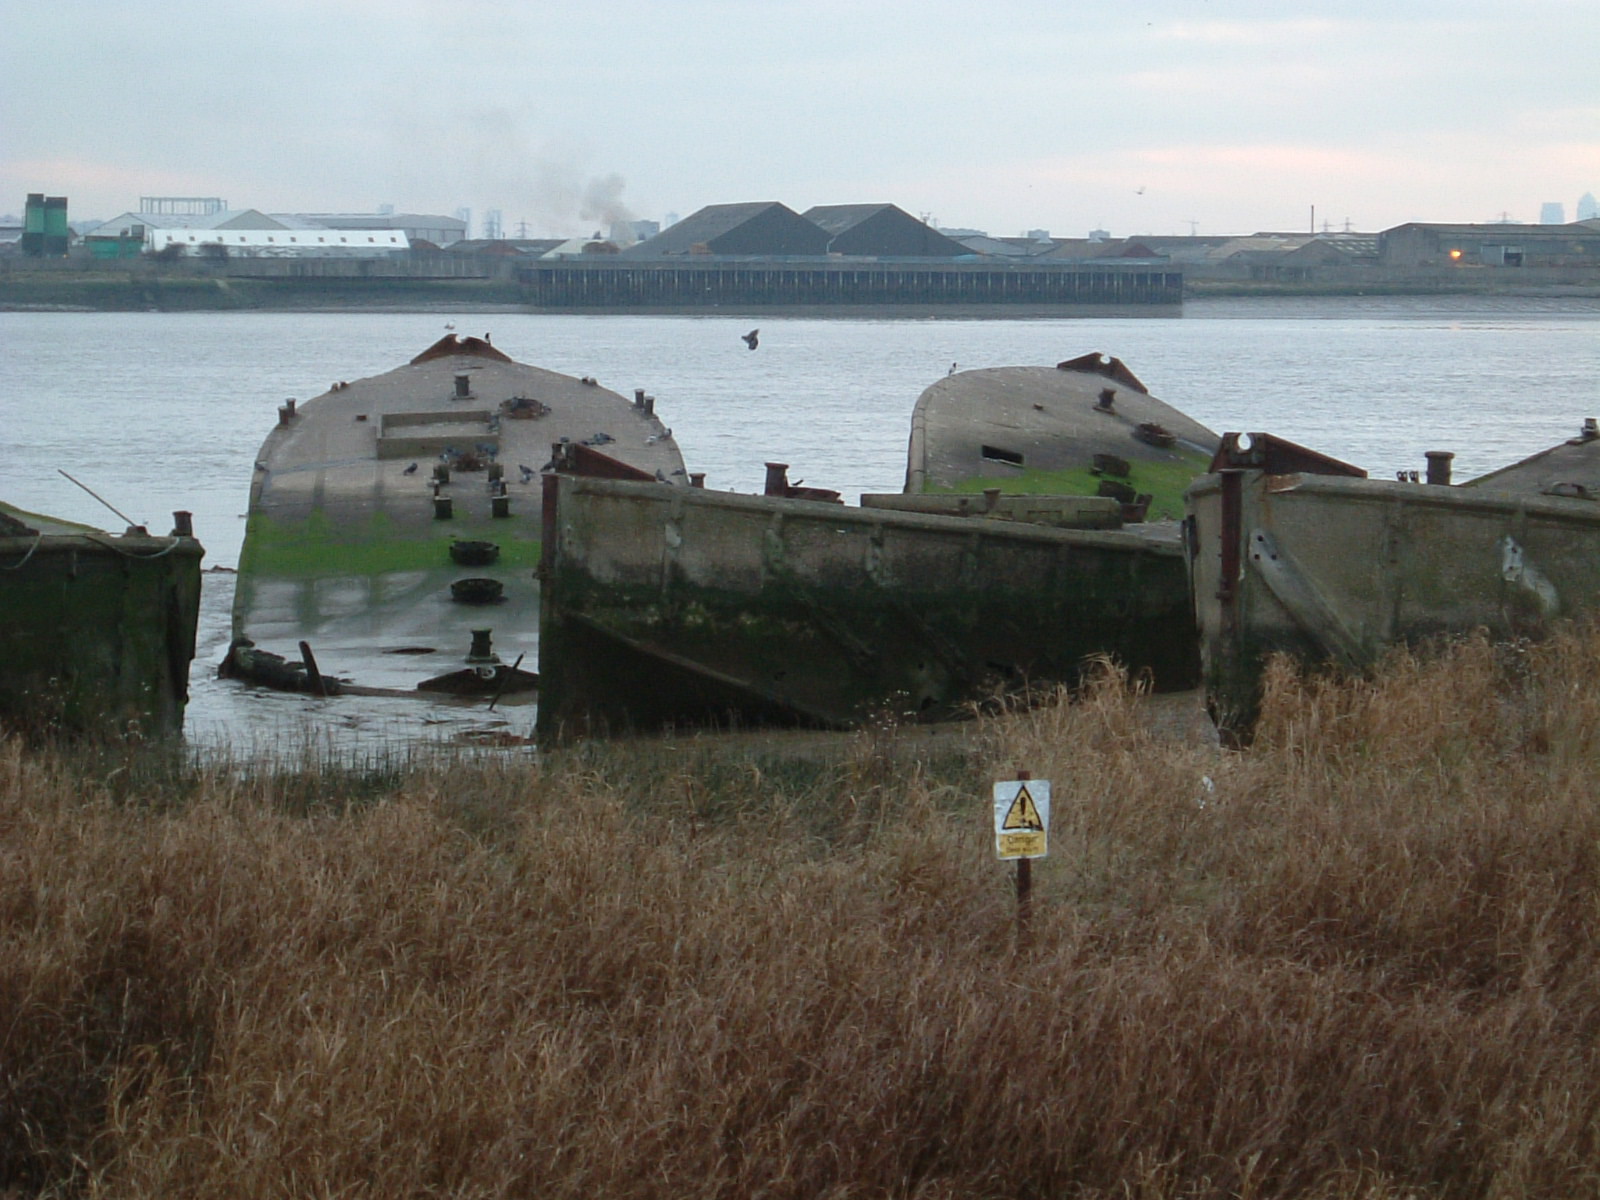 Concrete barges of D-Day scuppered in the Thames